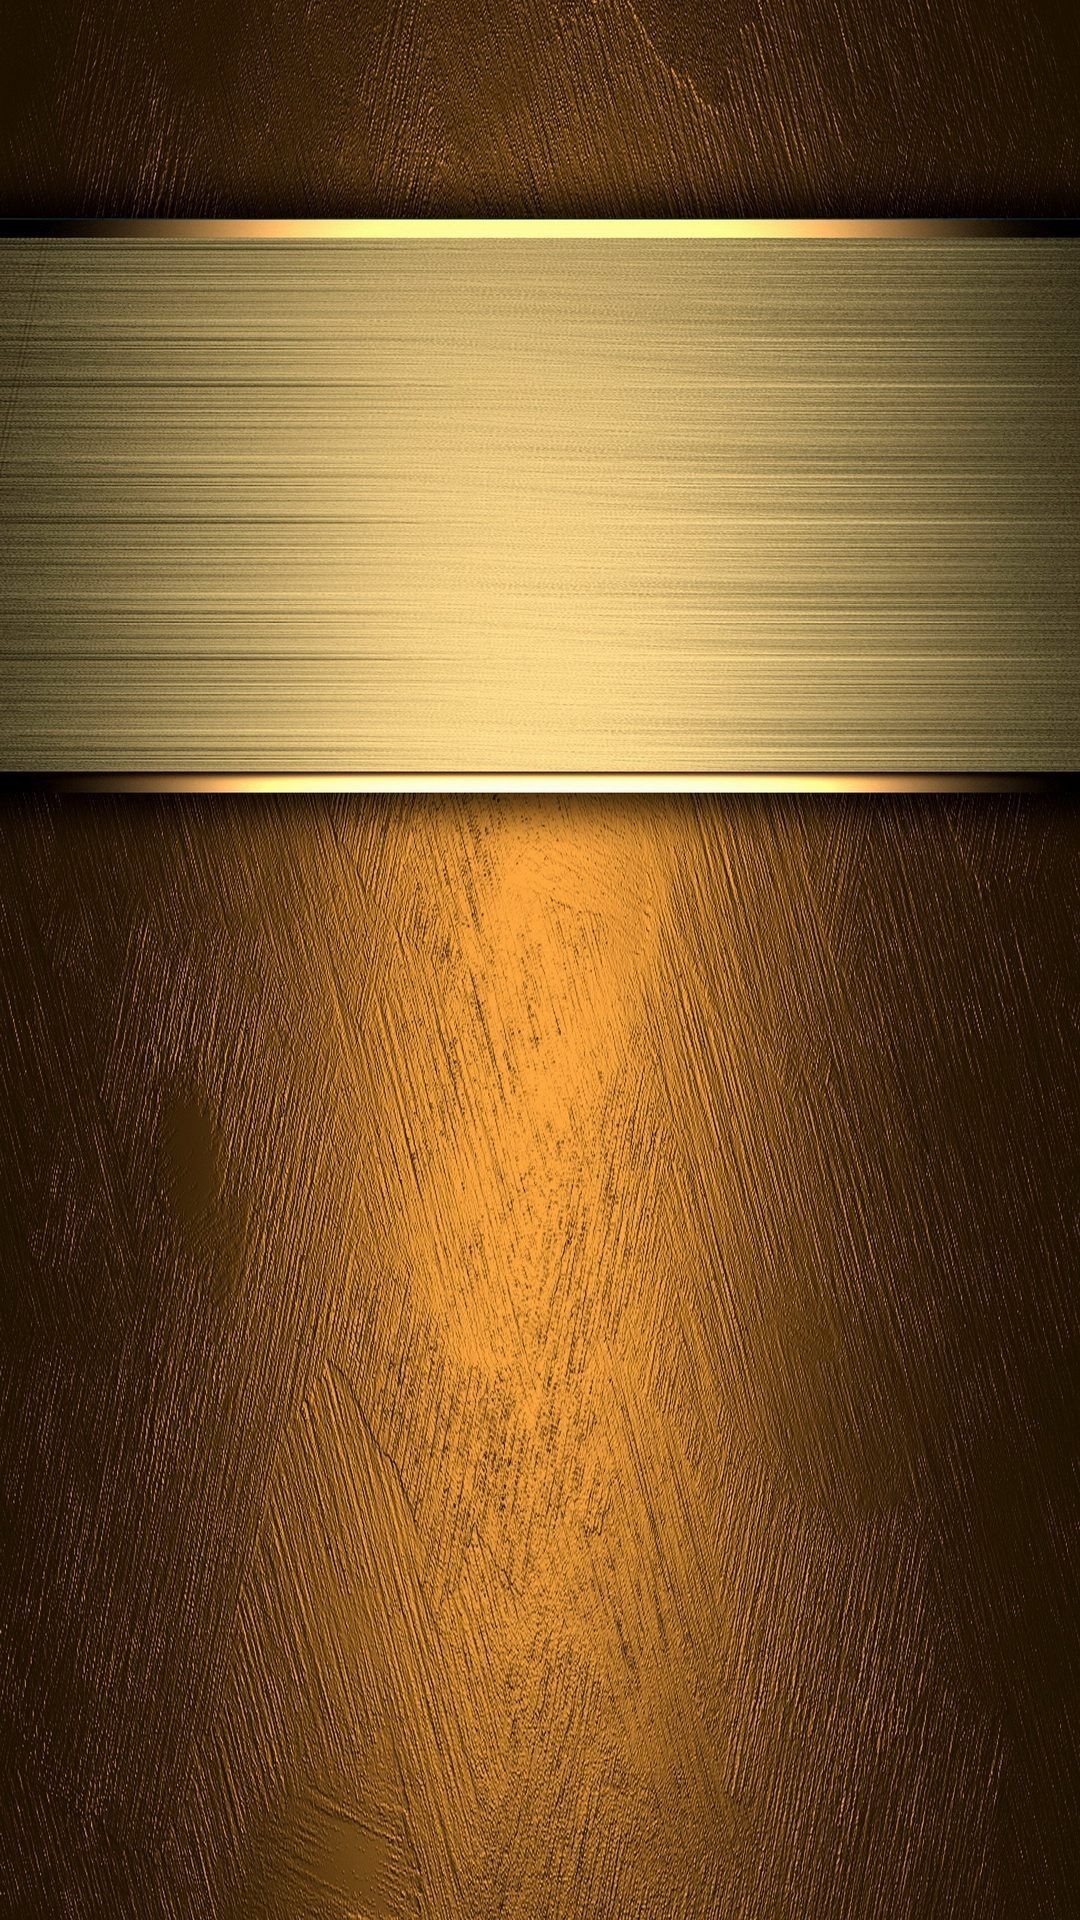 1080x1920 gold iphone Iphone 6 gold wallpaper images 2